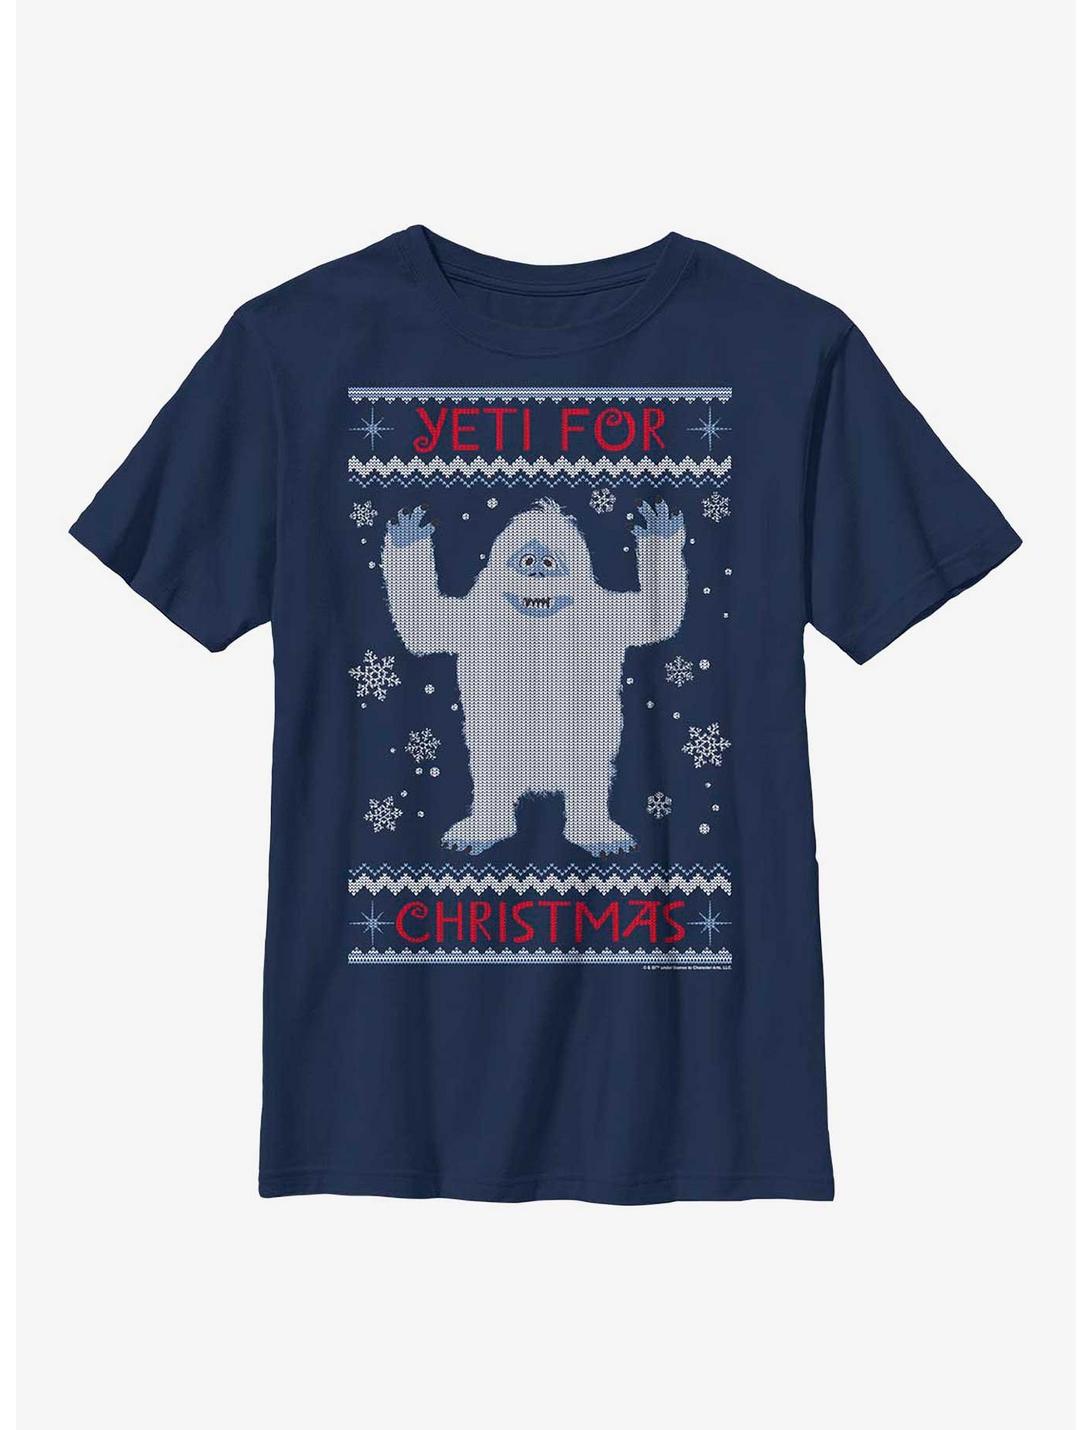 Rudolph The Red-Nosed Reindeer Yeti For Christmas Ugly Sweater Youth T-Shirt, NAVY, hi-res